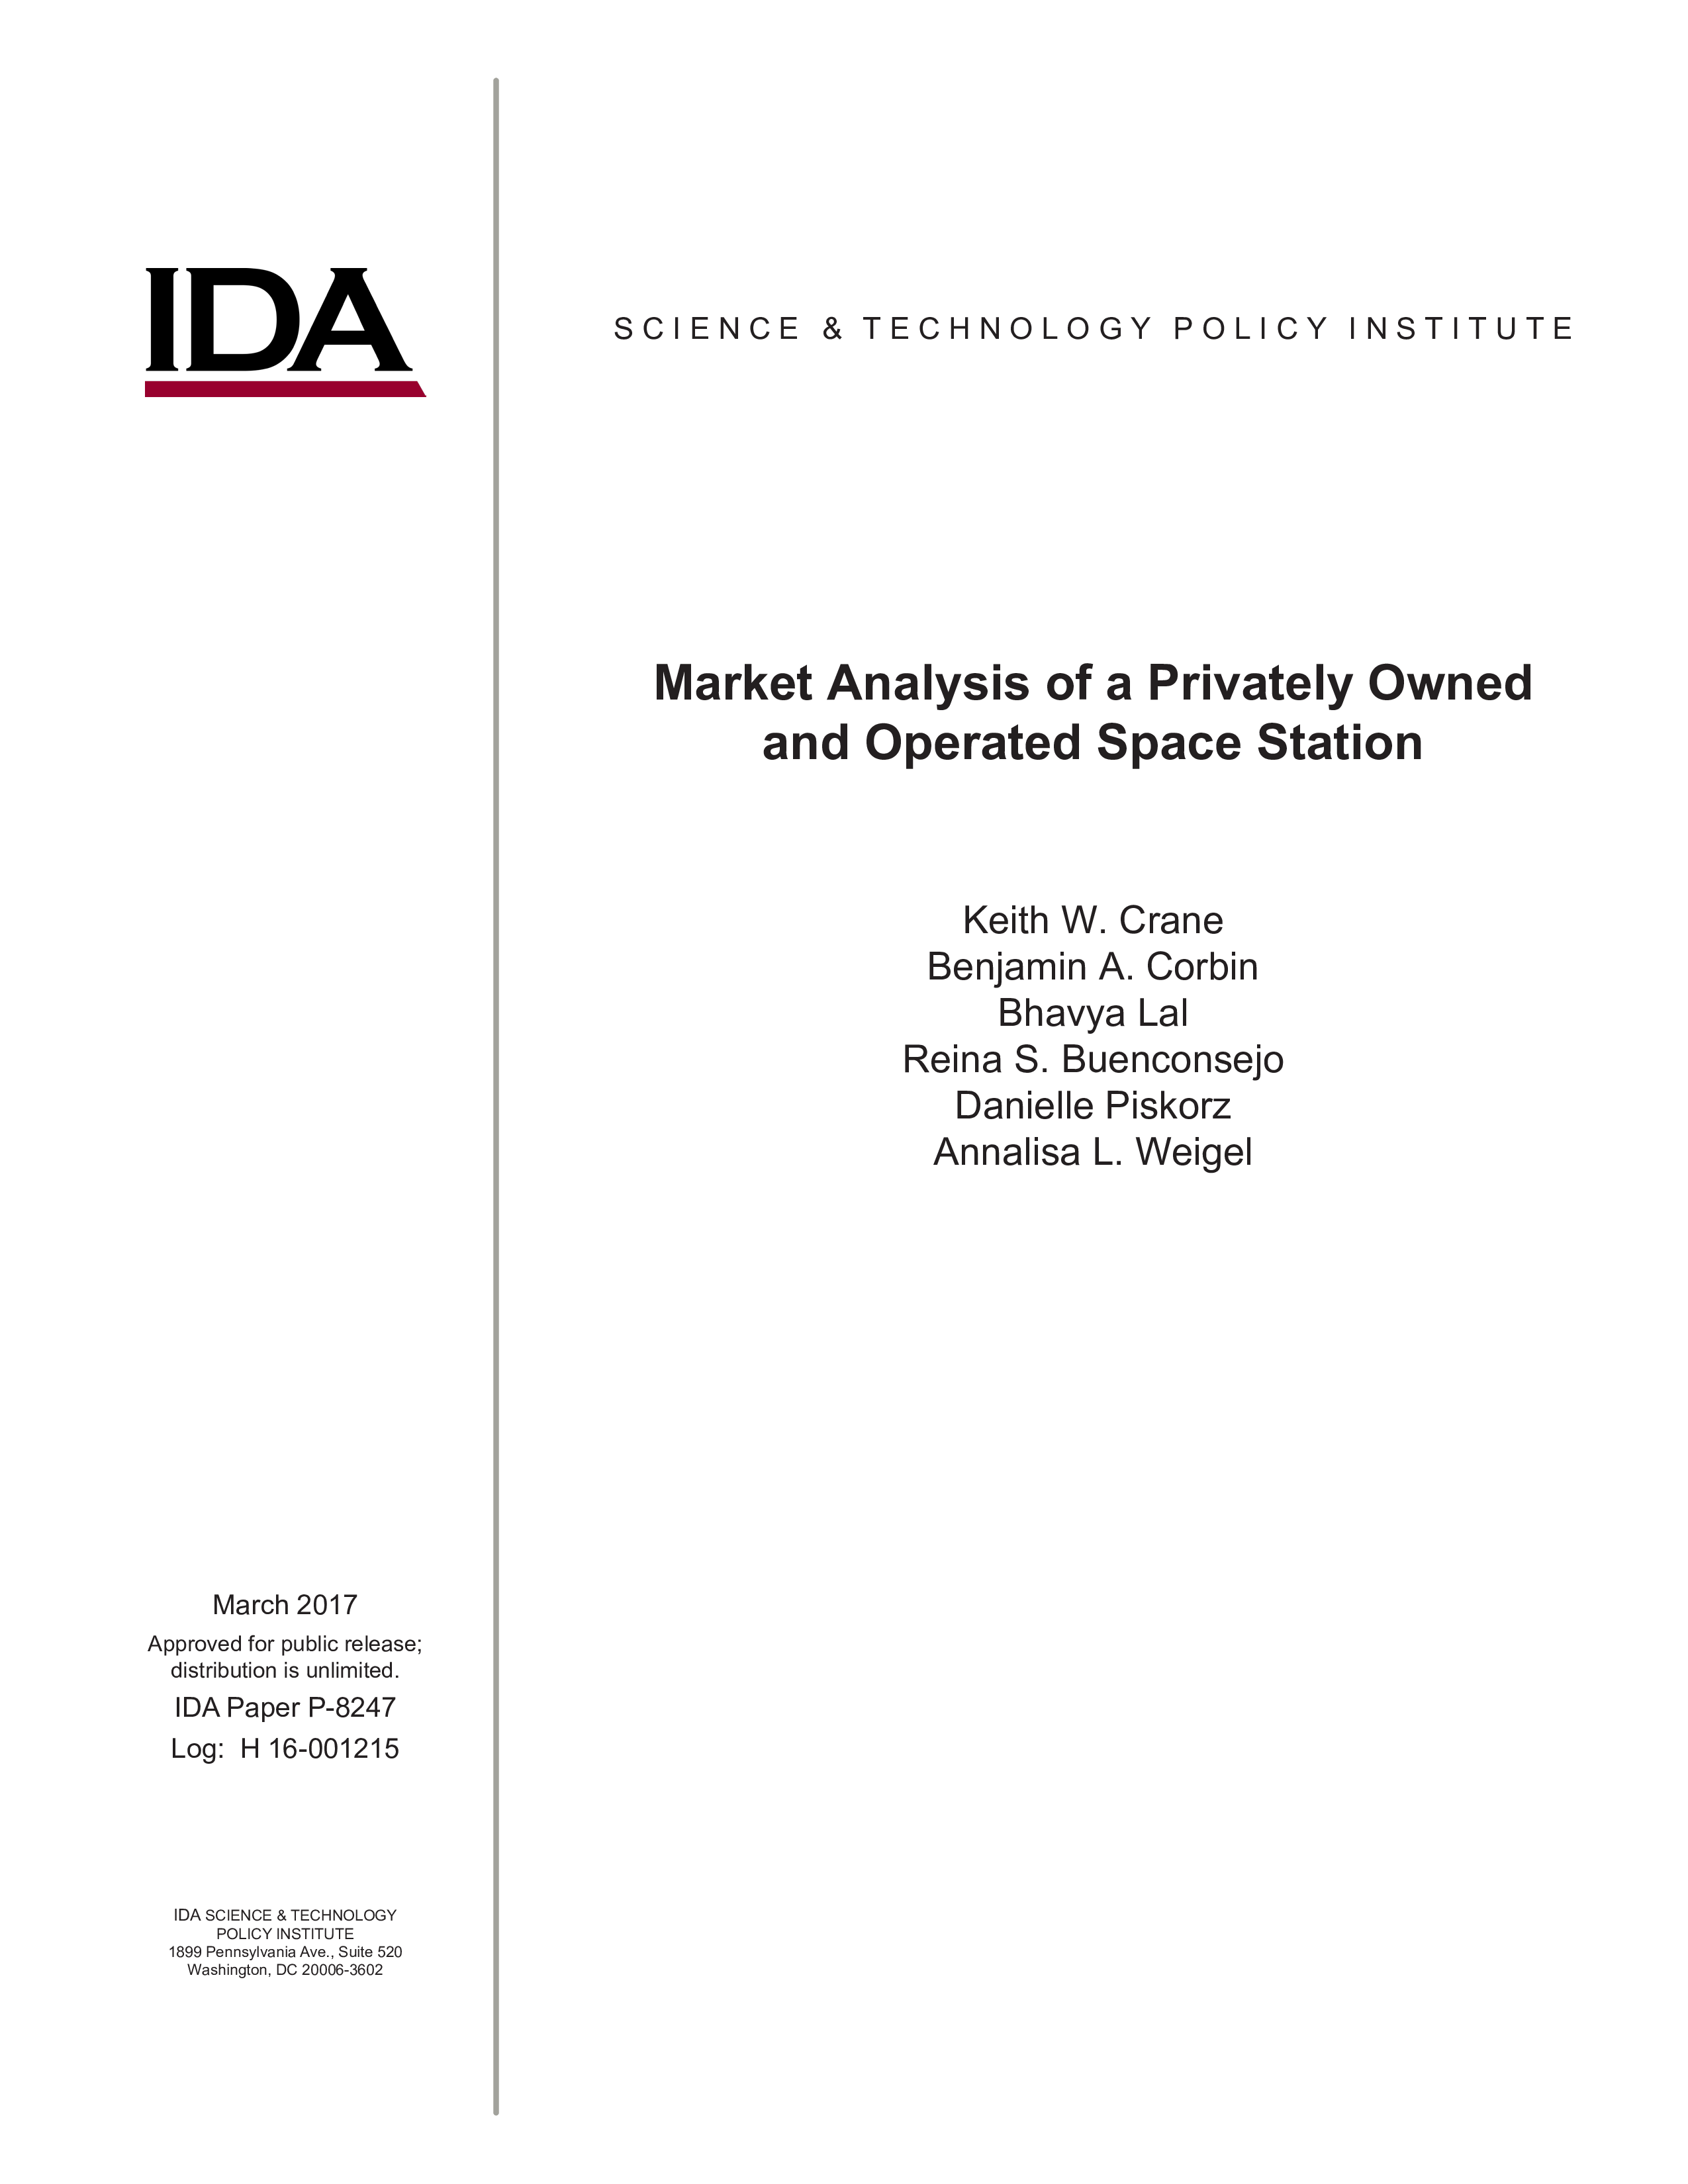 Market Analysis of a Privately Owned and Operated Space Station